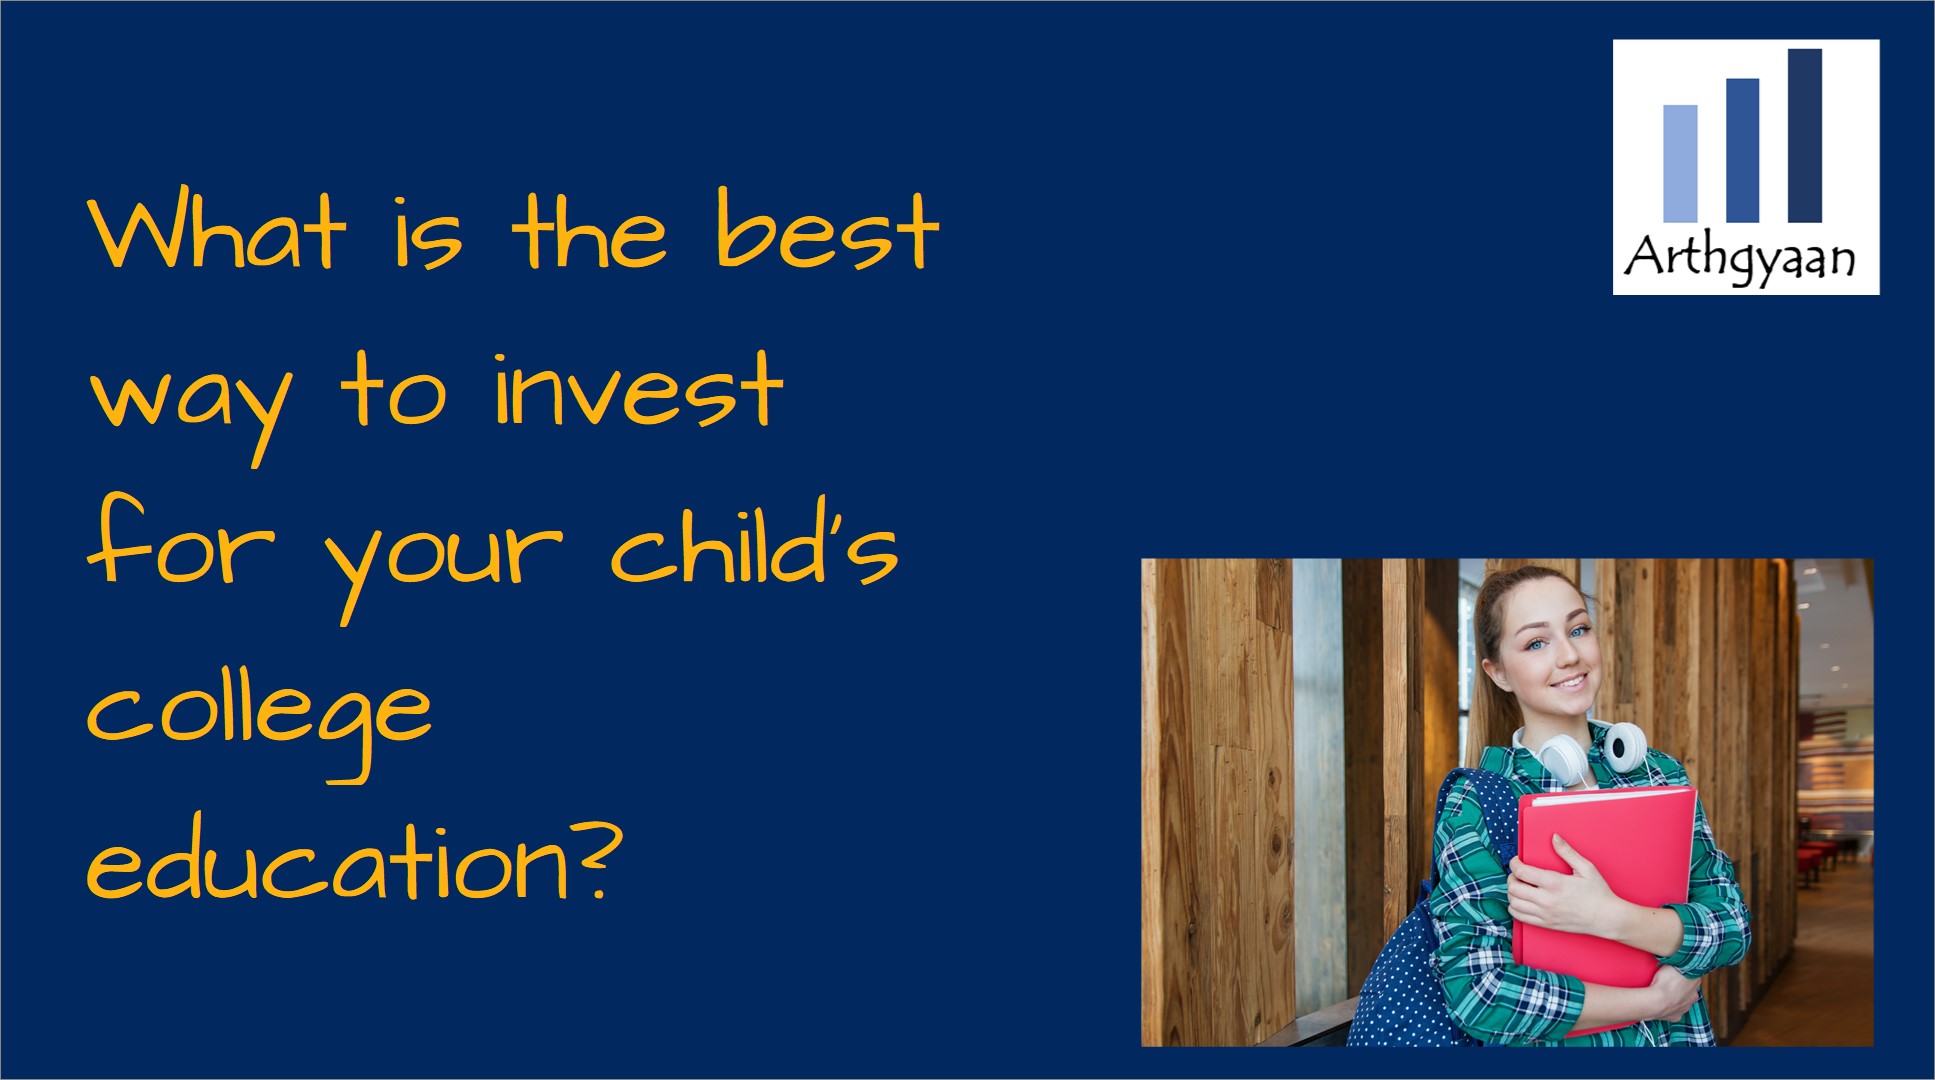 What is the best way to invest for your child's college education?